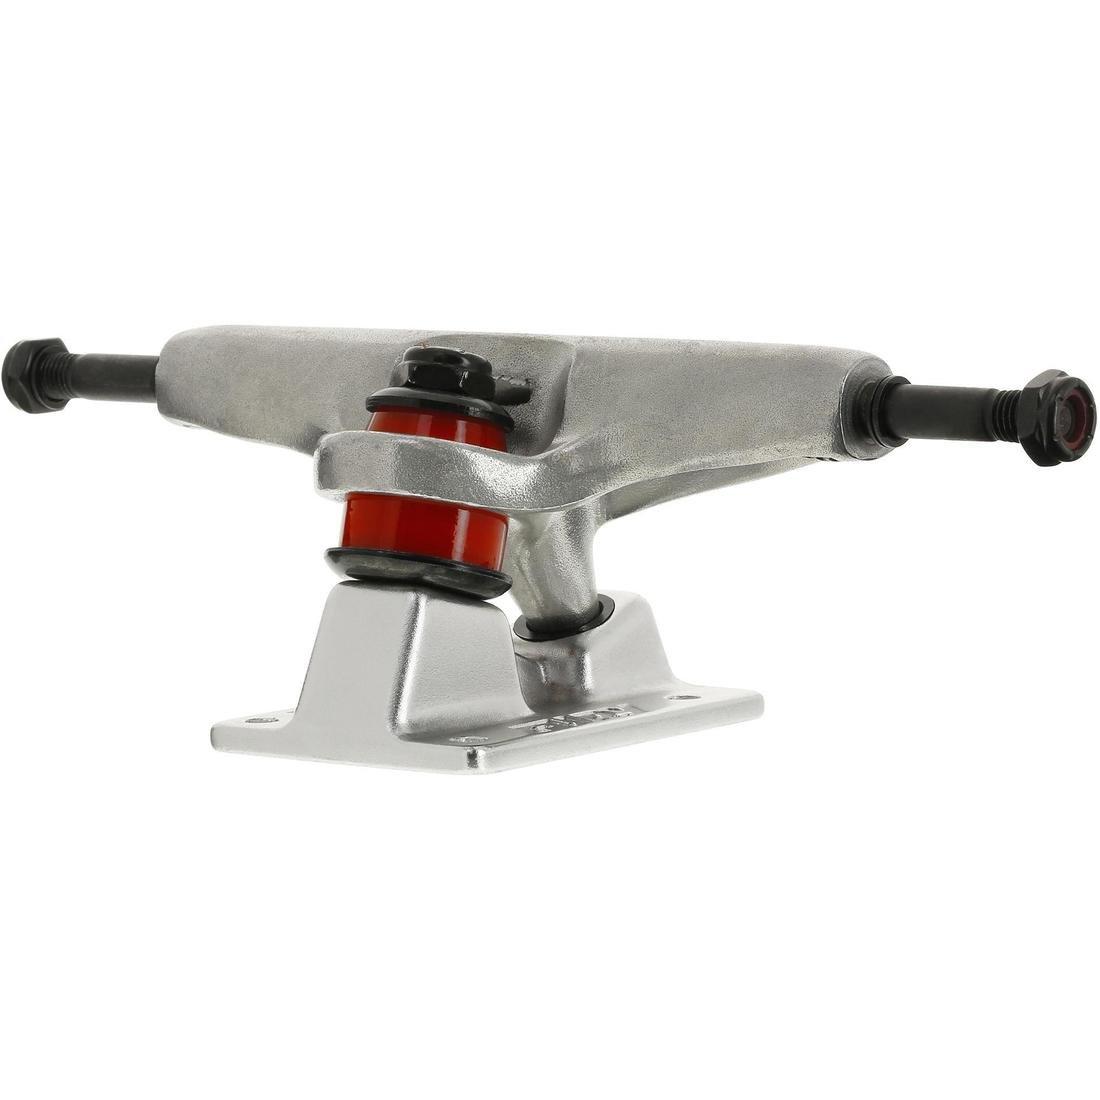 OXELO - Fury Skateboard Forged Baseplate Truck Size 8/20.32 Mm, Grey